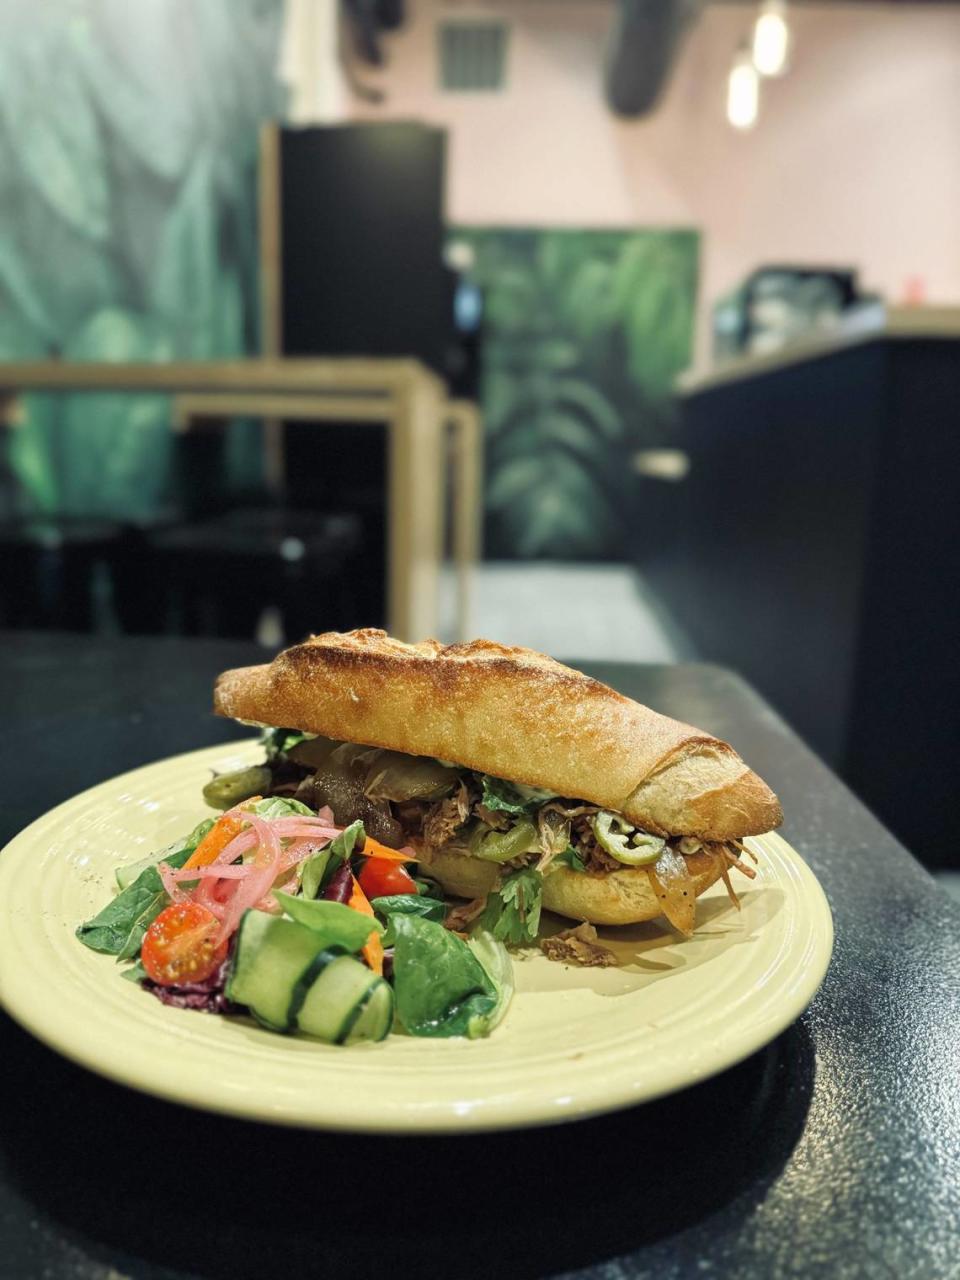 The Caribbean pork sandwich will come with marinated and slow roasted pork, caramelized onion, pickled jalapenos, romaine lettuce, cilantro and a tangy garlic aioli, served on a toasted demi baguette that’s fresh-baked daily. It’s pictured with a mixed greens salad.